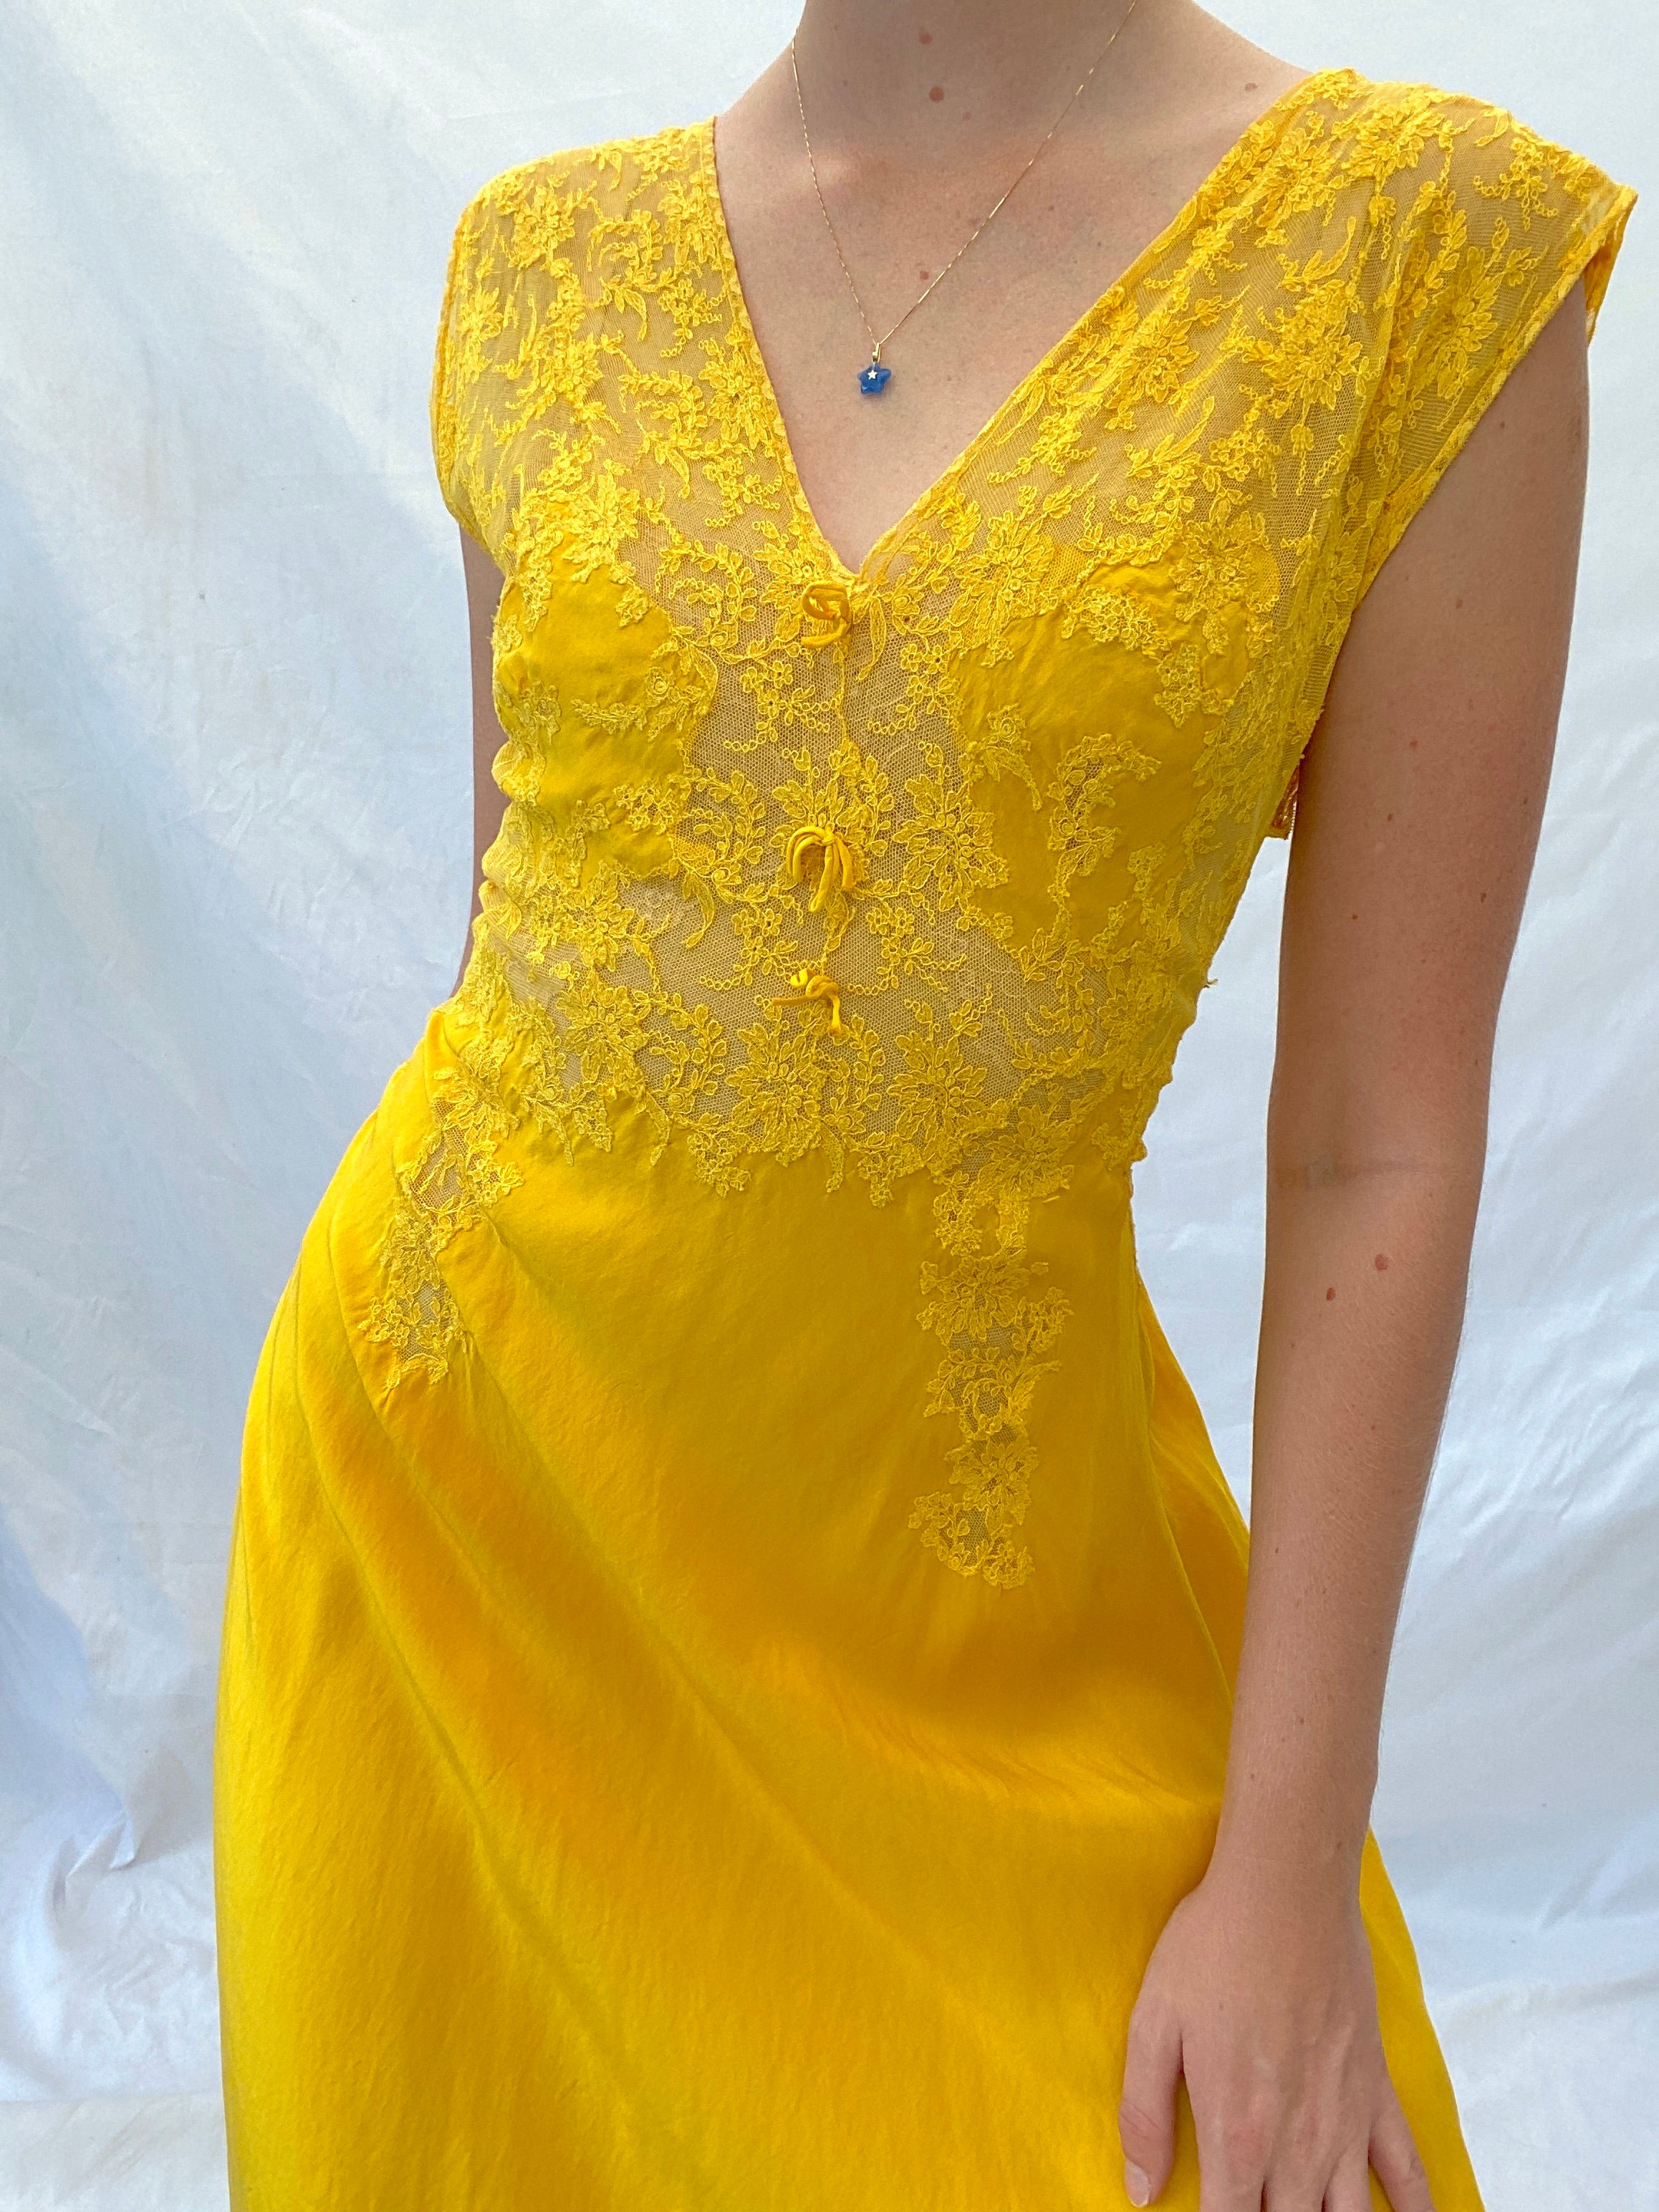 Hand Dyed Autumn Yellow Silk Dress with Lace Bust